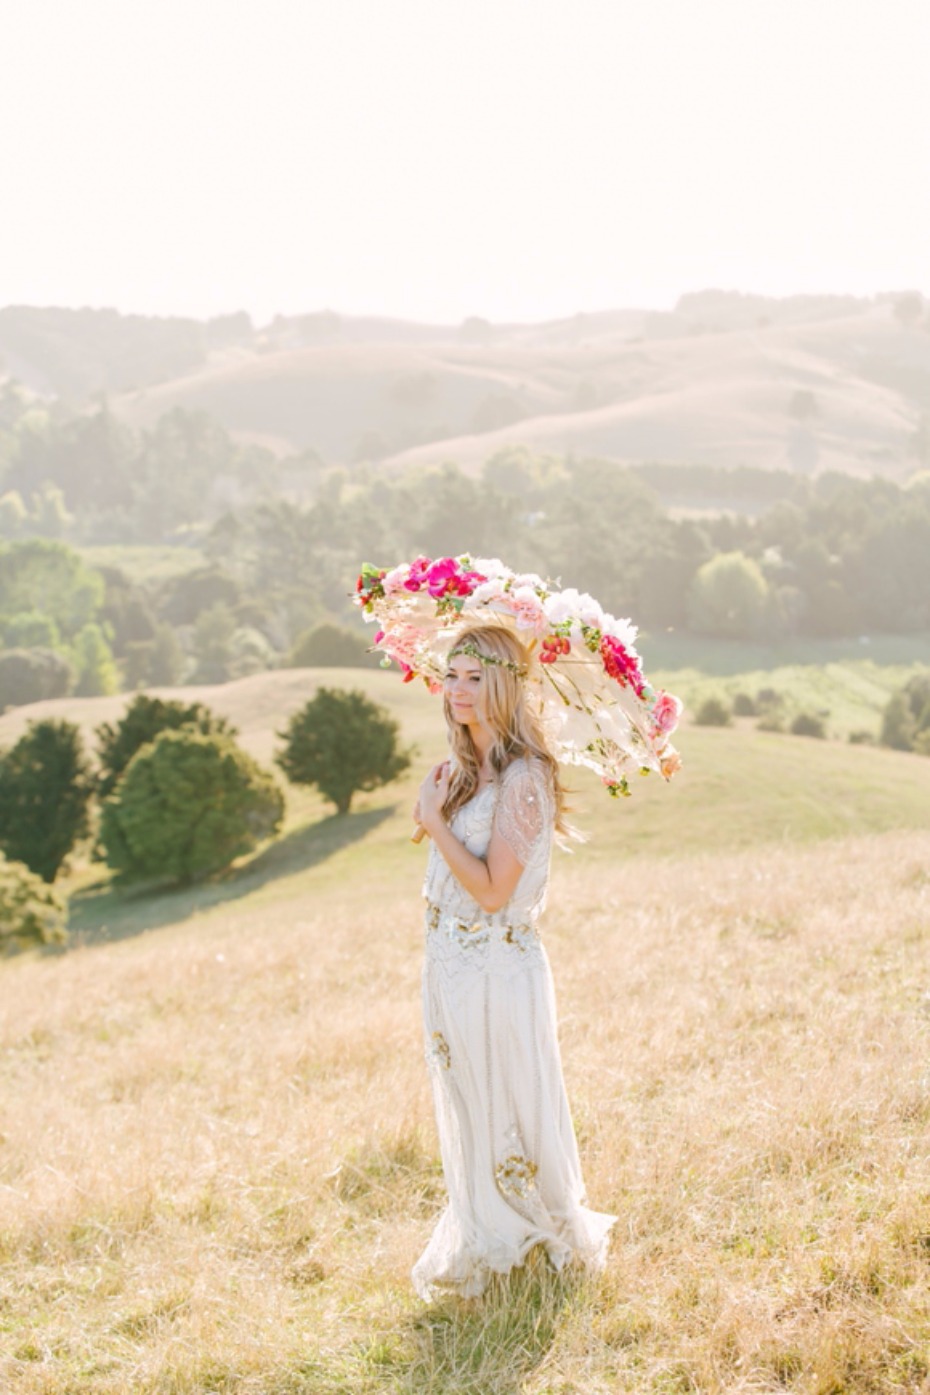 7 ways to use parasols in your wedding